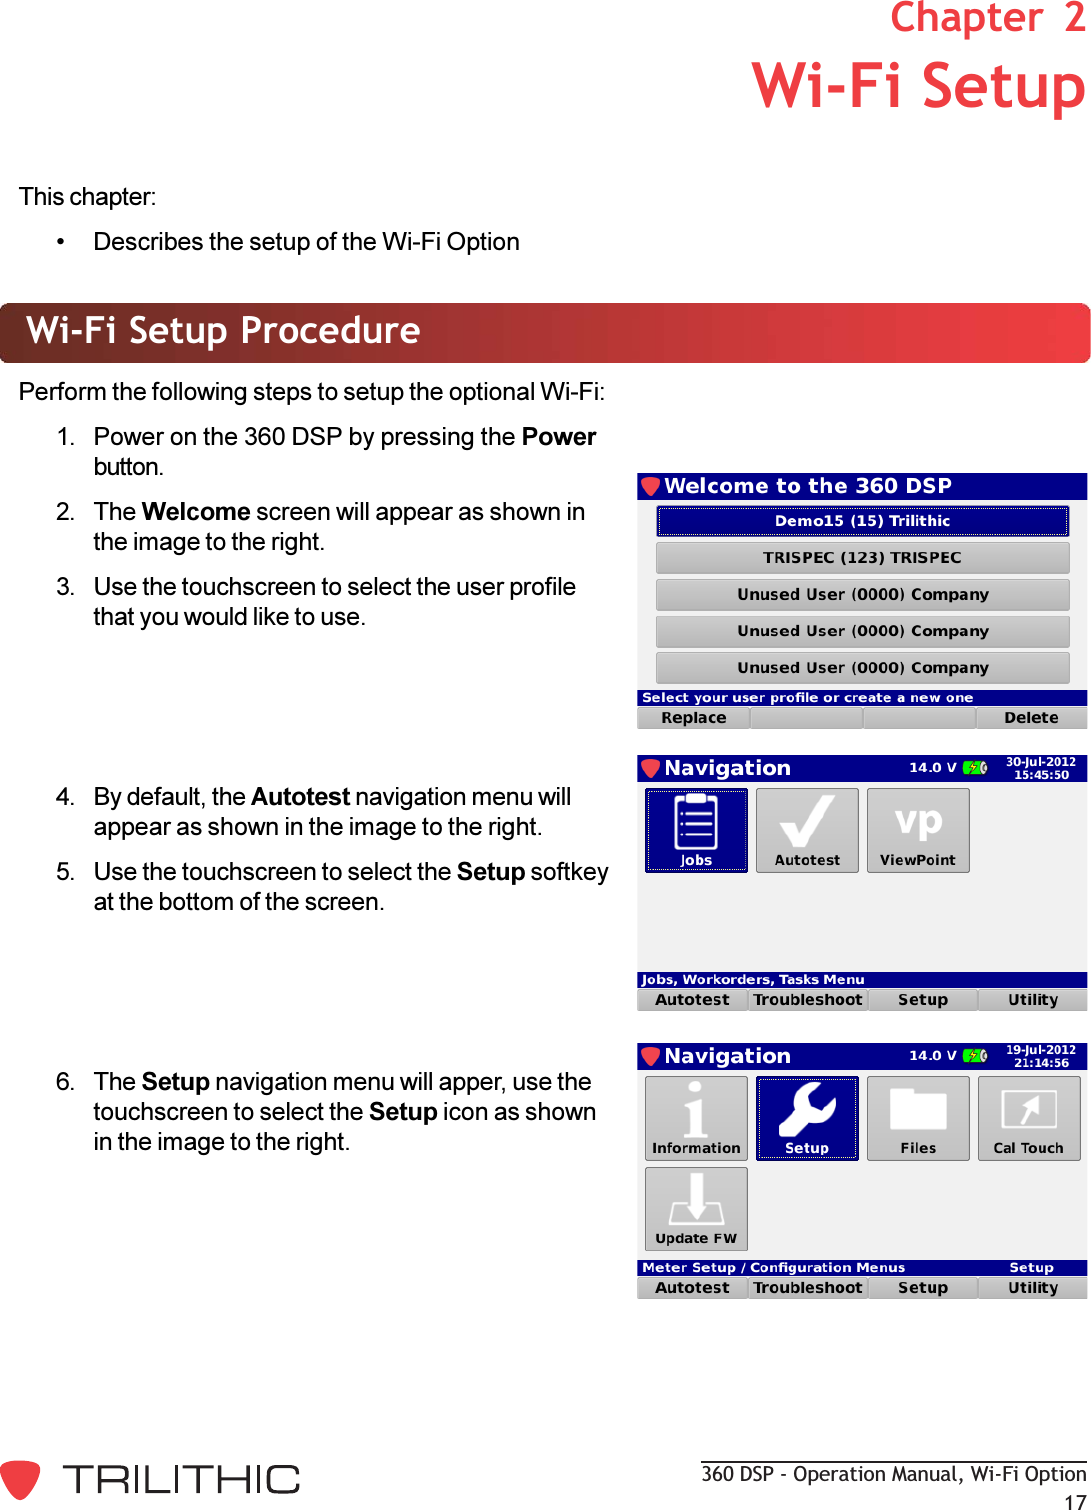 360 DSP - Operation Manual, Wi-Fi Option17This chapter: Describes the setup of the Wi-Fi OptionWi-Fi Setup ProcedurePerform the following steps to setup the optional Wi-Fi:1. Power on the 360 DSP by pressing the Powerbutton.2. The Welcome screen will appear as shown inthe image to the right.3. Use the touchscreen to select the user profilethat you would like to use.4. By default, the Autotest navigation menu willappear as shown in the image to the right.5. Use the touchscreen to select the Setup softkeyat the bottom of the screen.6. The Setup navigation menu will apper, use thetouchscreen to select the Setup icon as shownin the image to the right.2. Wi-Fi SetupChapter  2